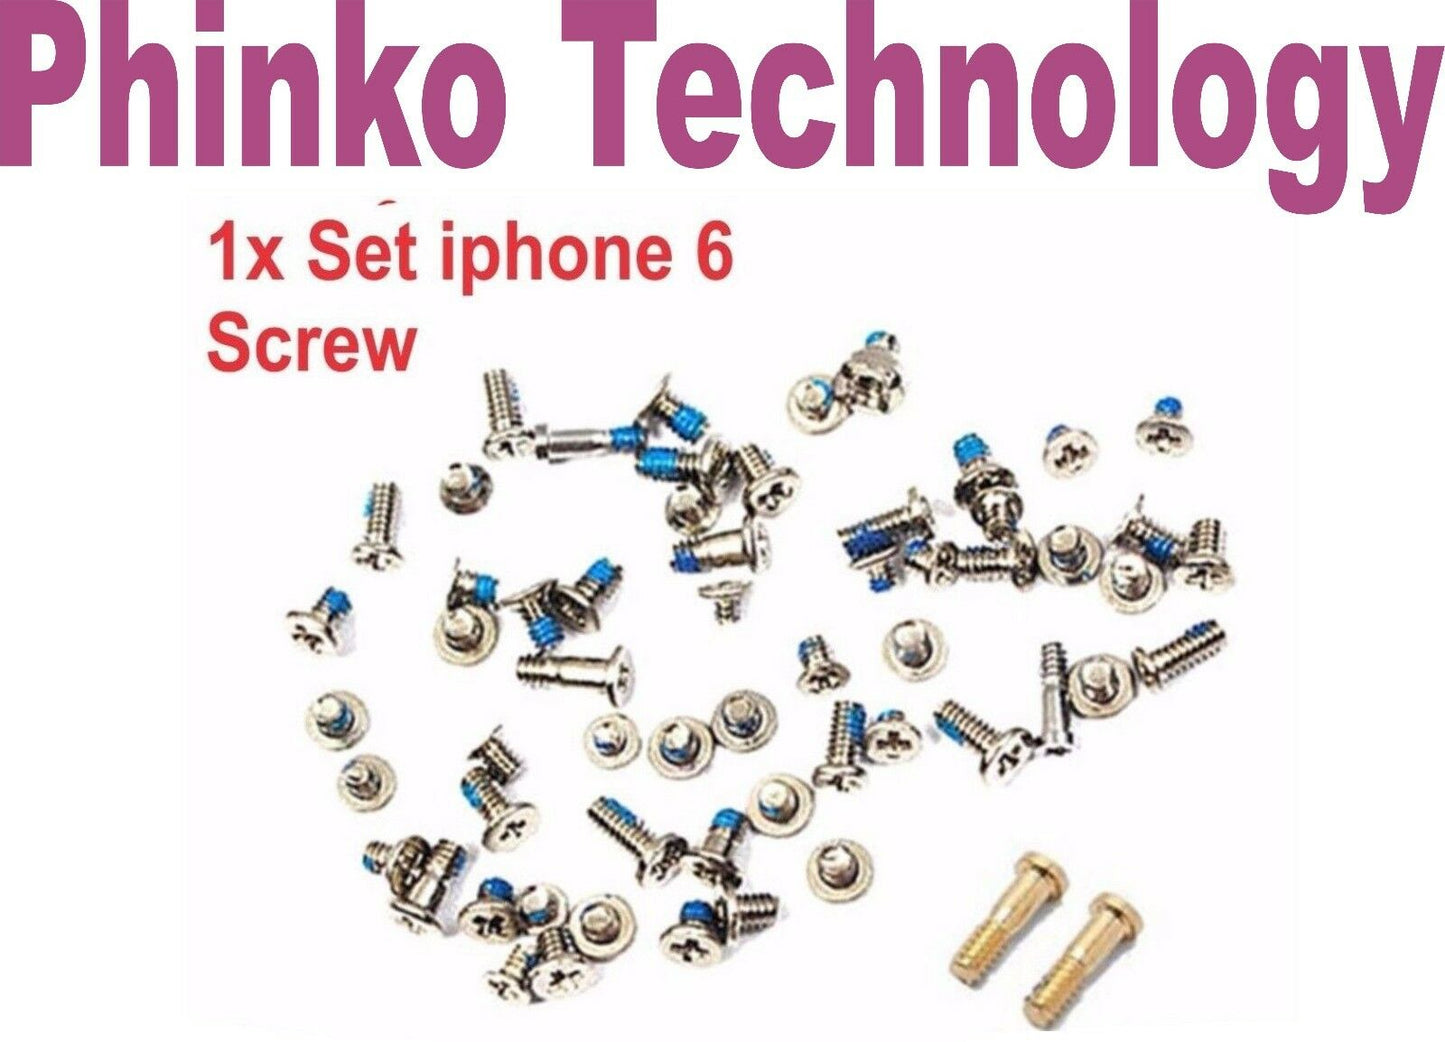 Full Screws Set for iphone 6 with  2 Bottom Screws for iPhone 6 screw 4.7''